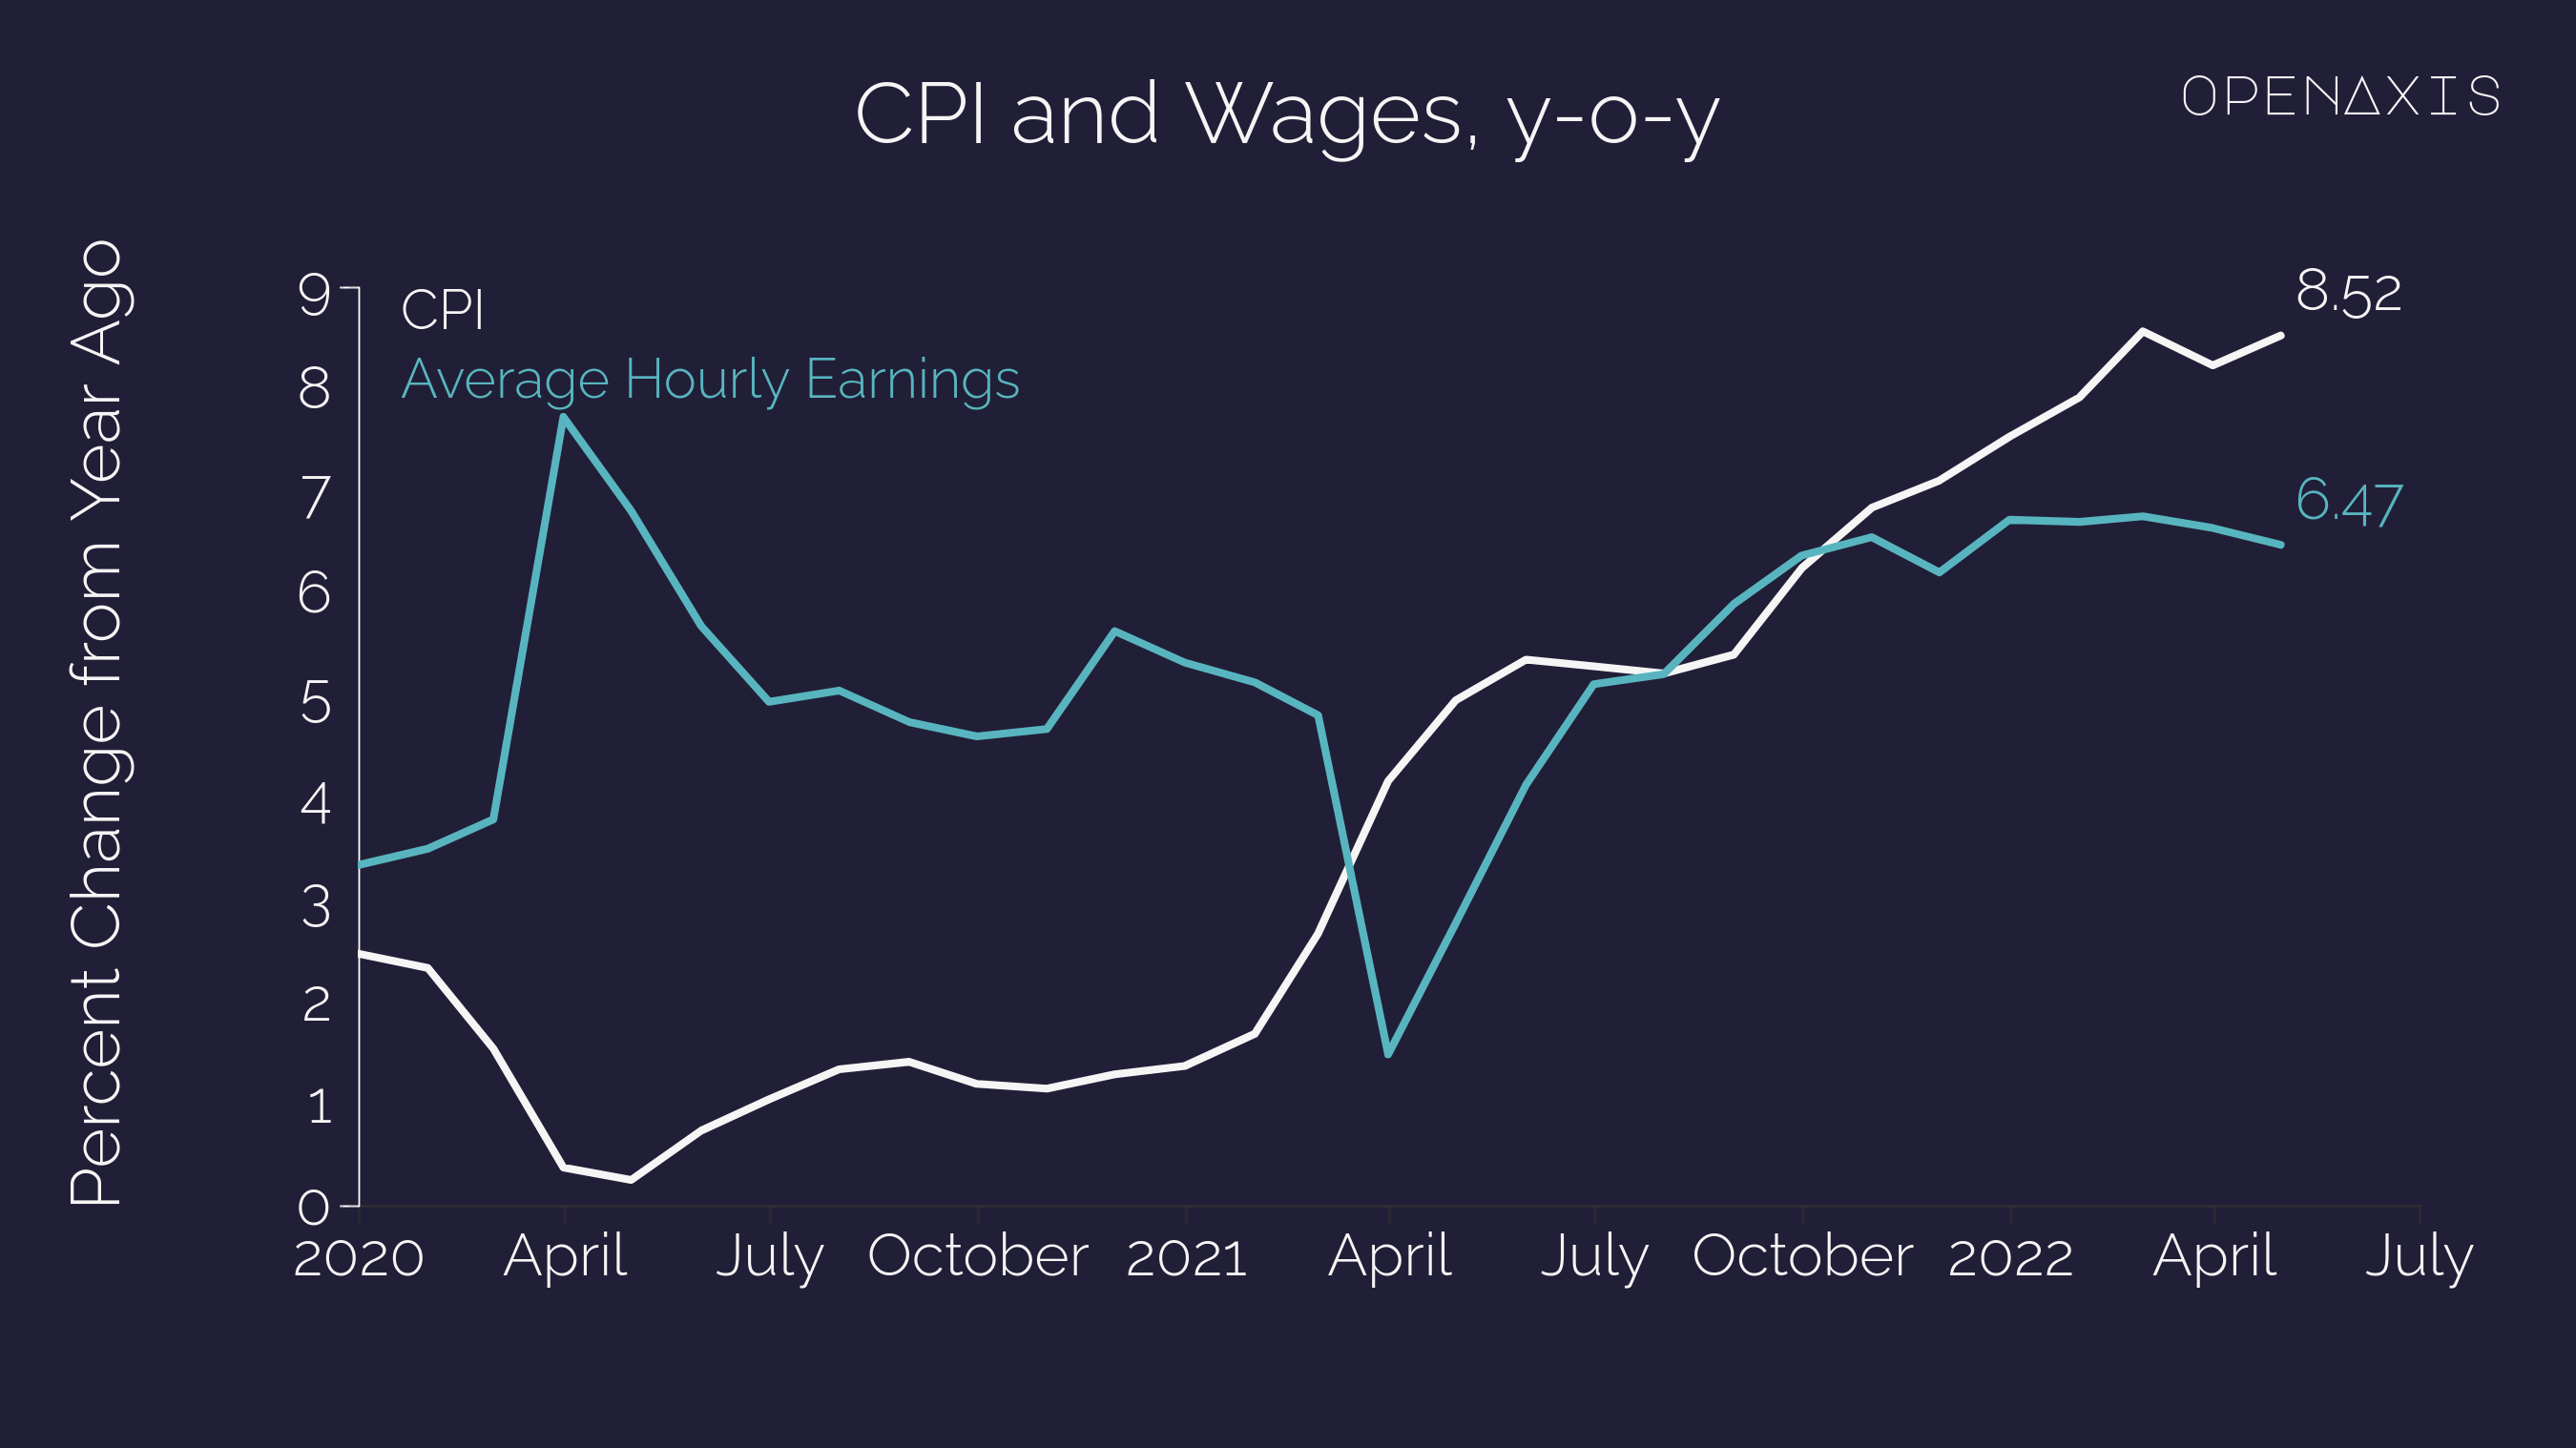 "CPI and Wages, y-o-y"